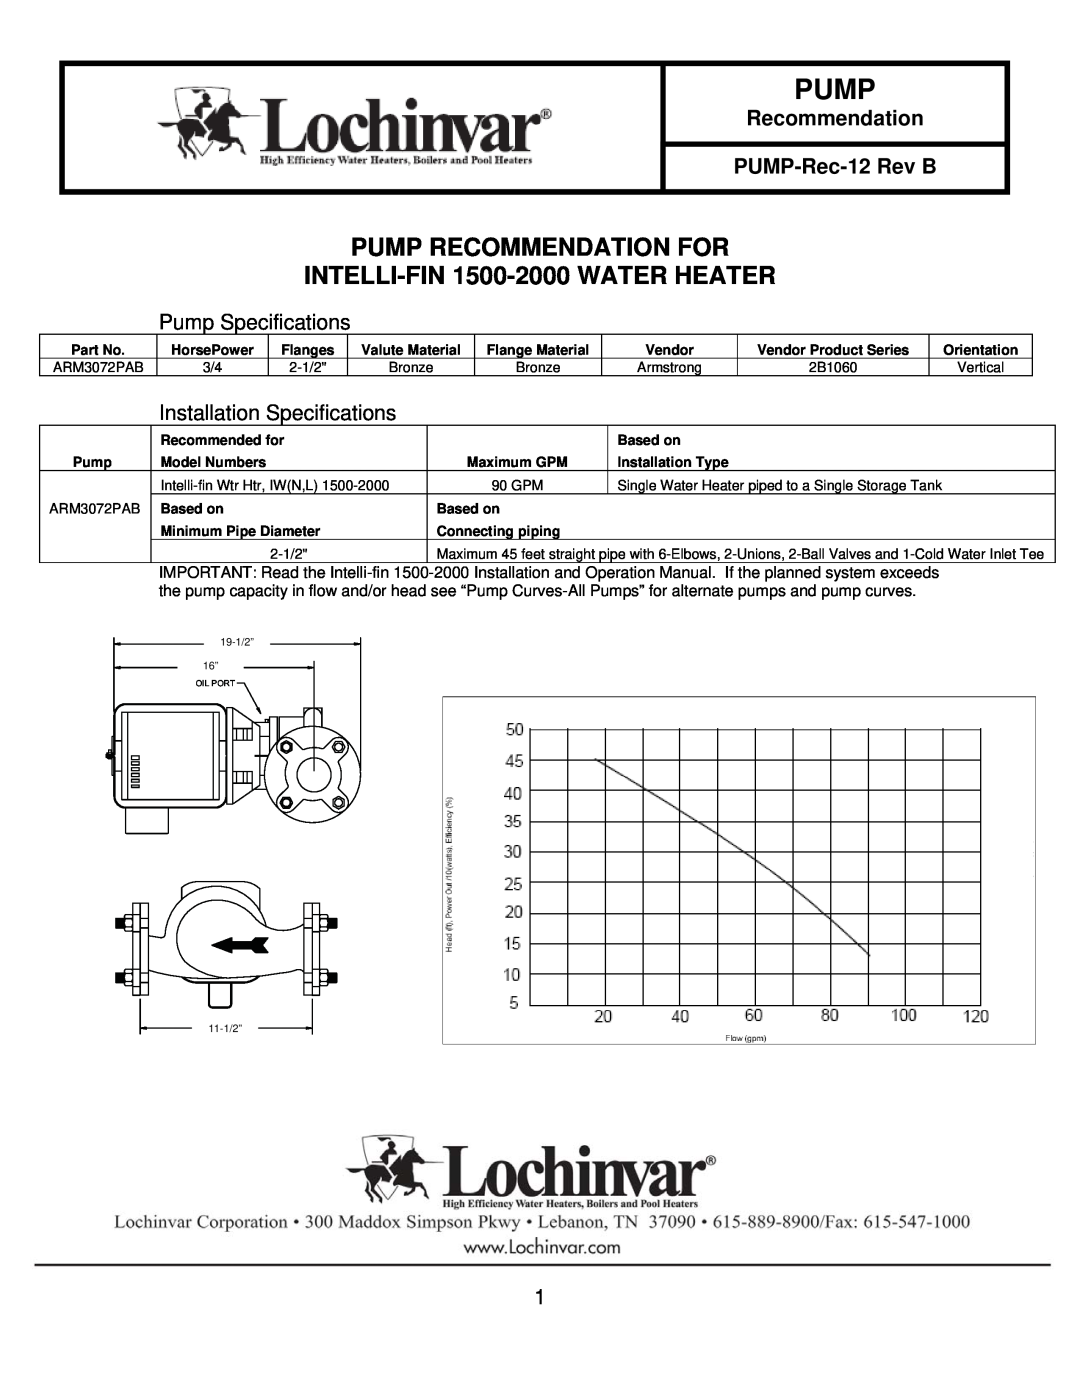 Lochinvar ARM3072PAB specifications Pump Recommendation For, INTELLI-FIN 1500-2000WATER HEATER, Pump Specifications 